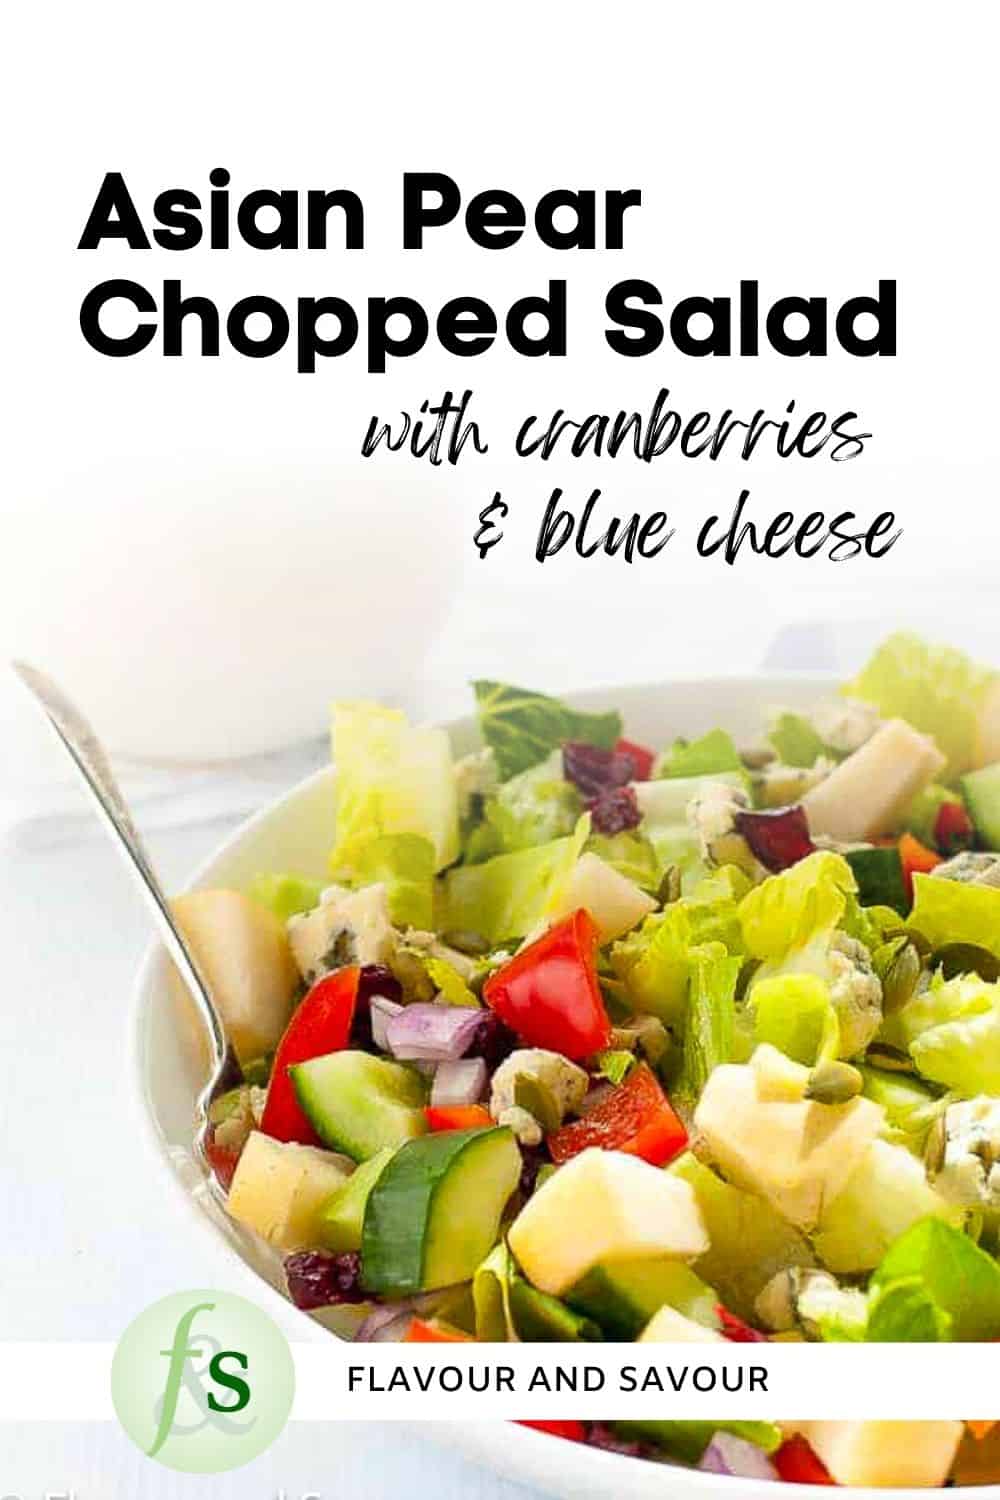 Image with text overlay for Asian Pear Chopped Salad with Cranberries and Blue Cheese